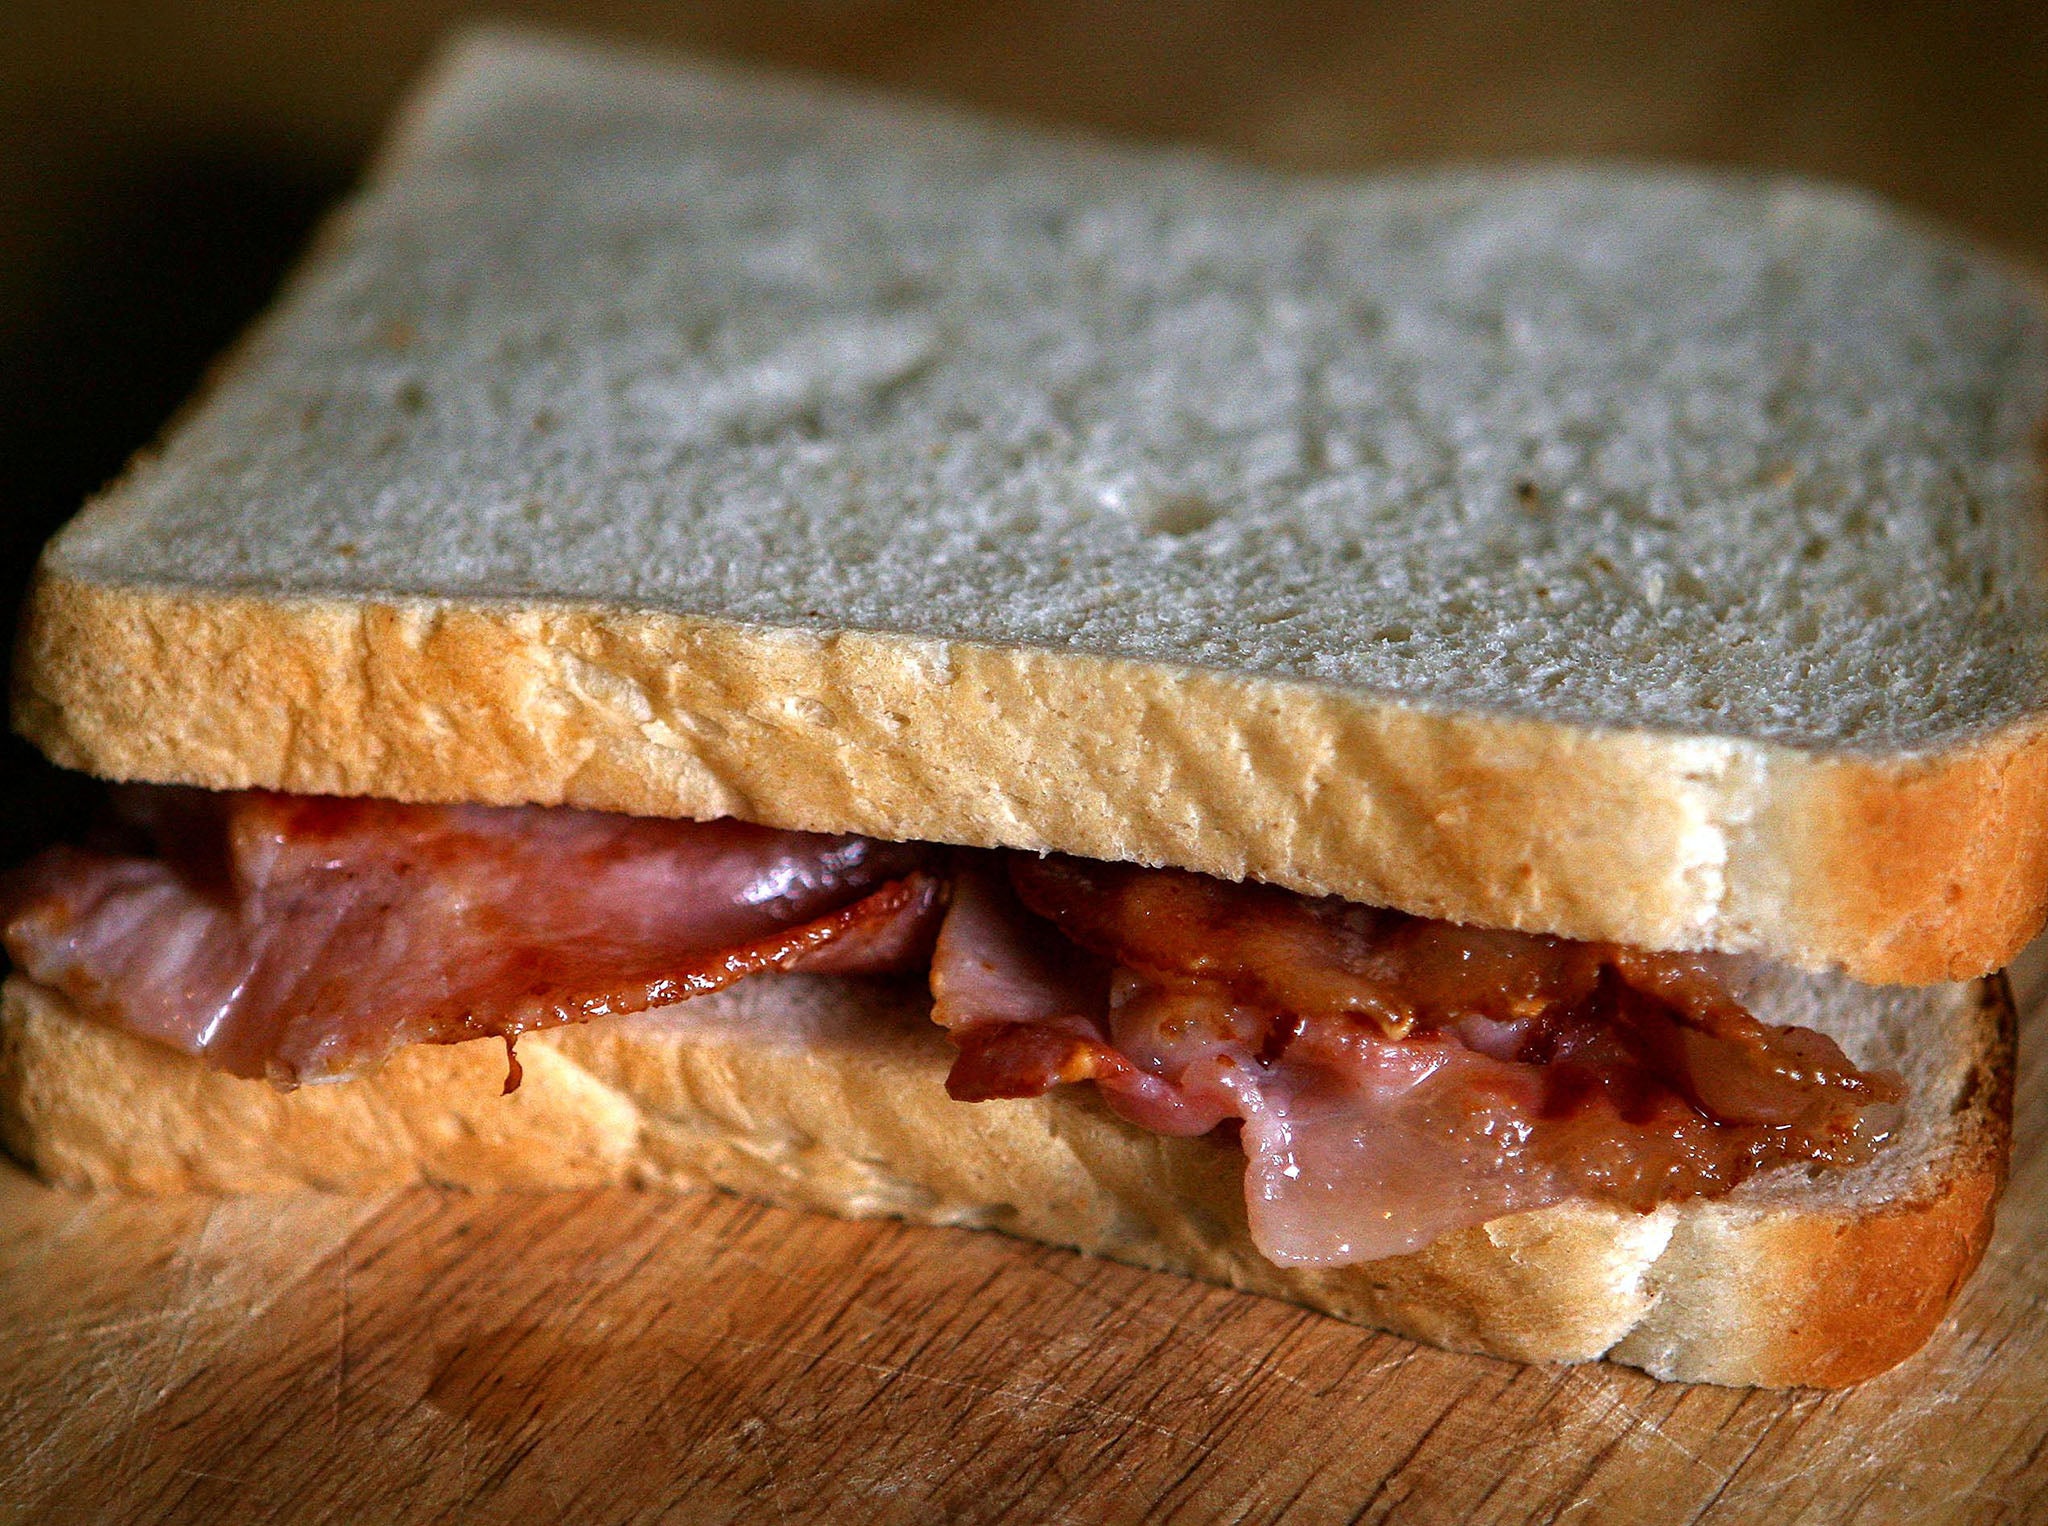 Eating two rashers a day threatens to increase risk of stomach cancer